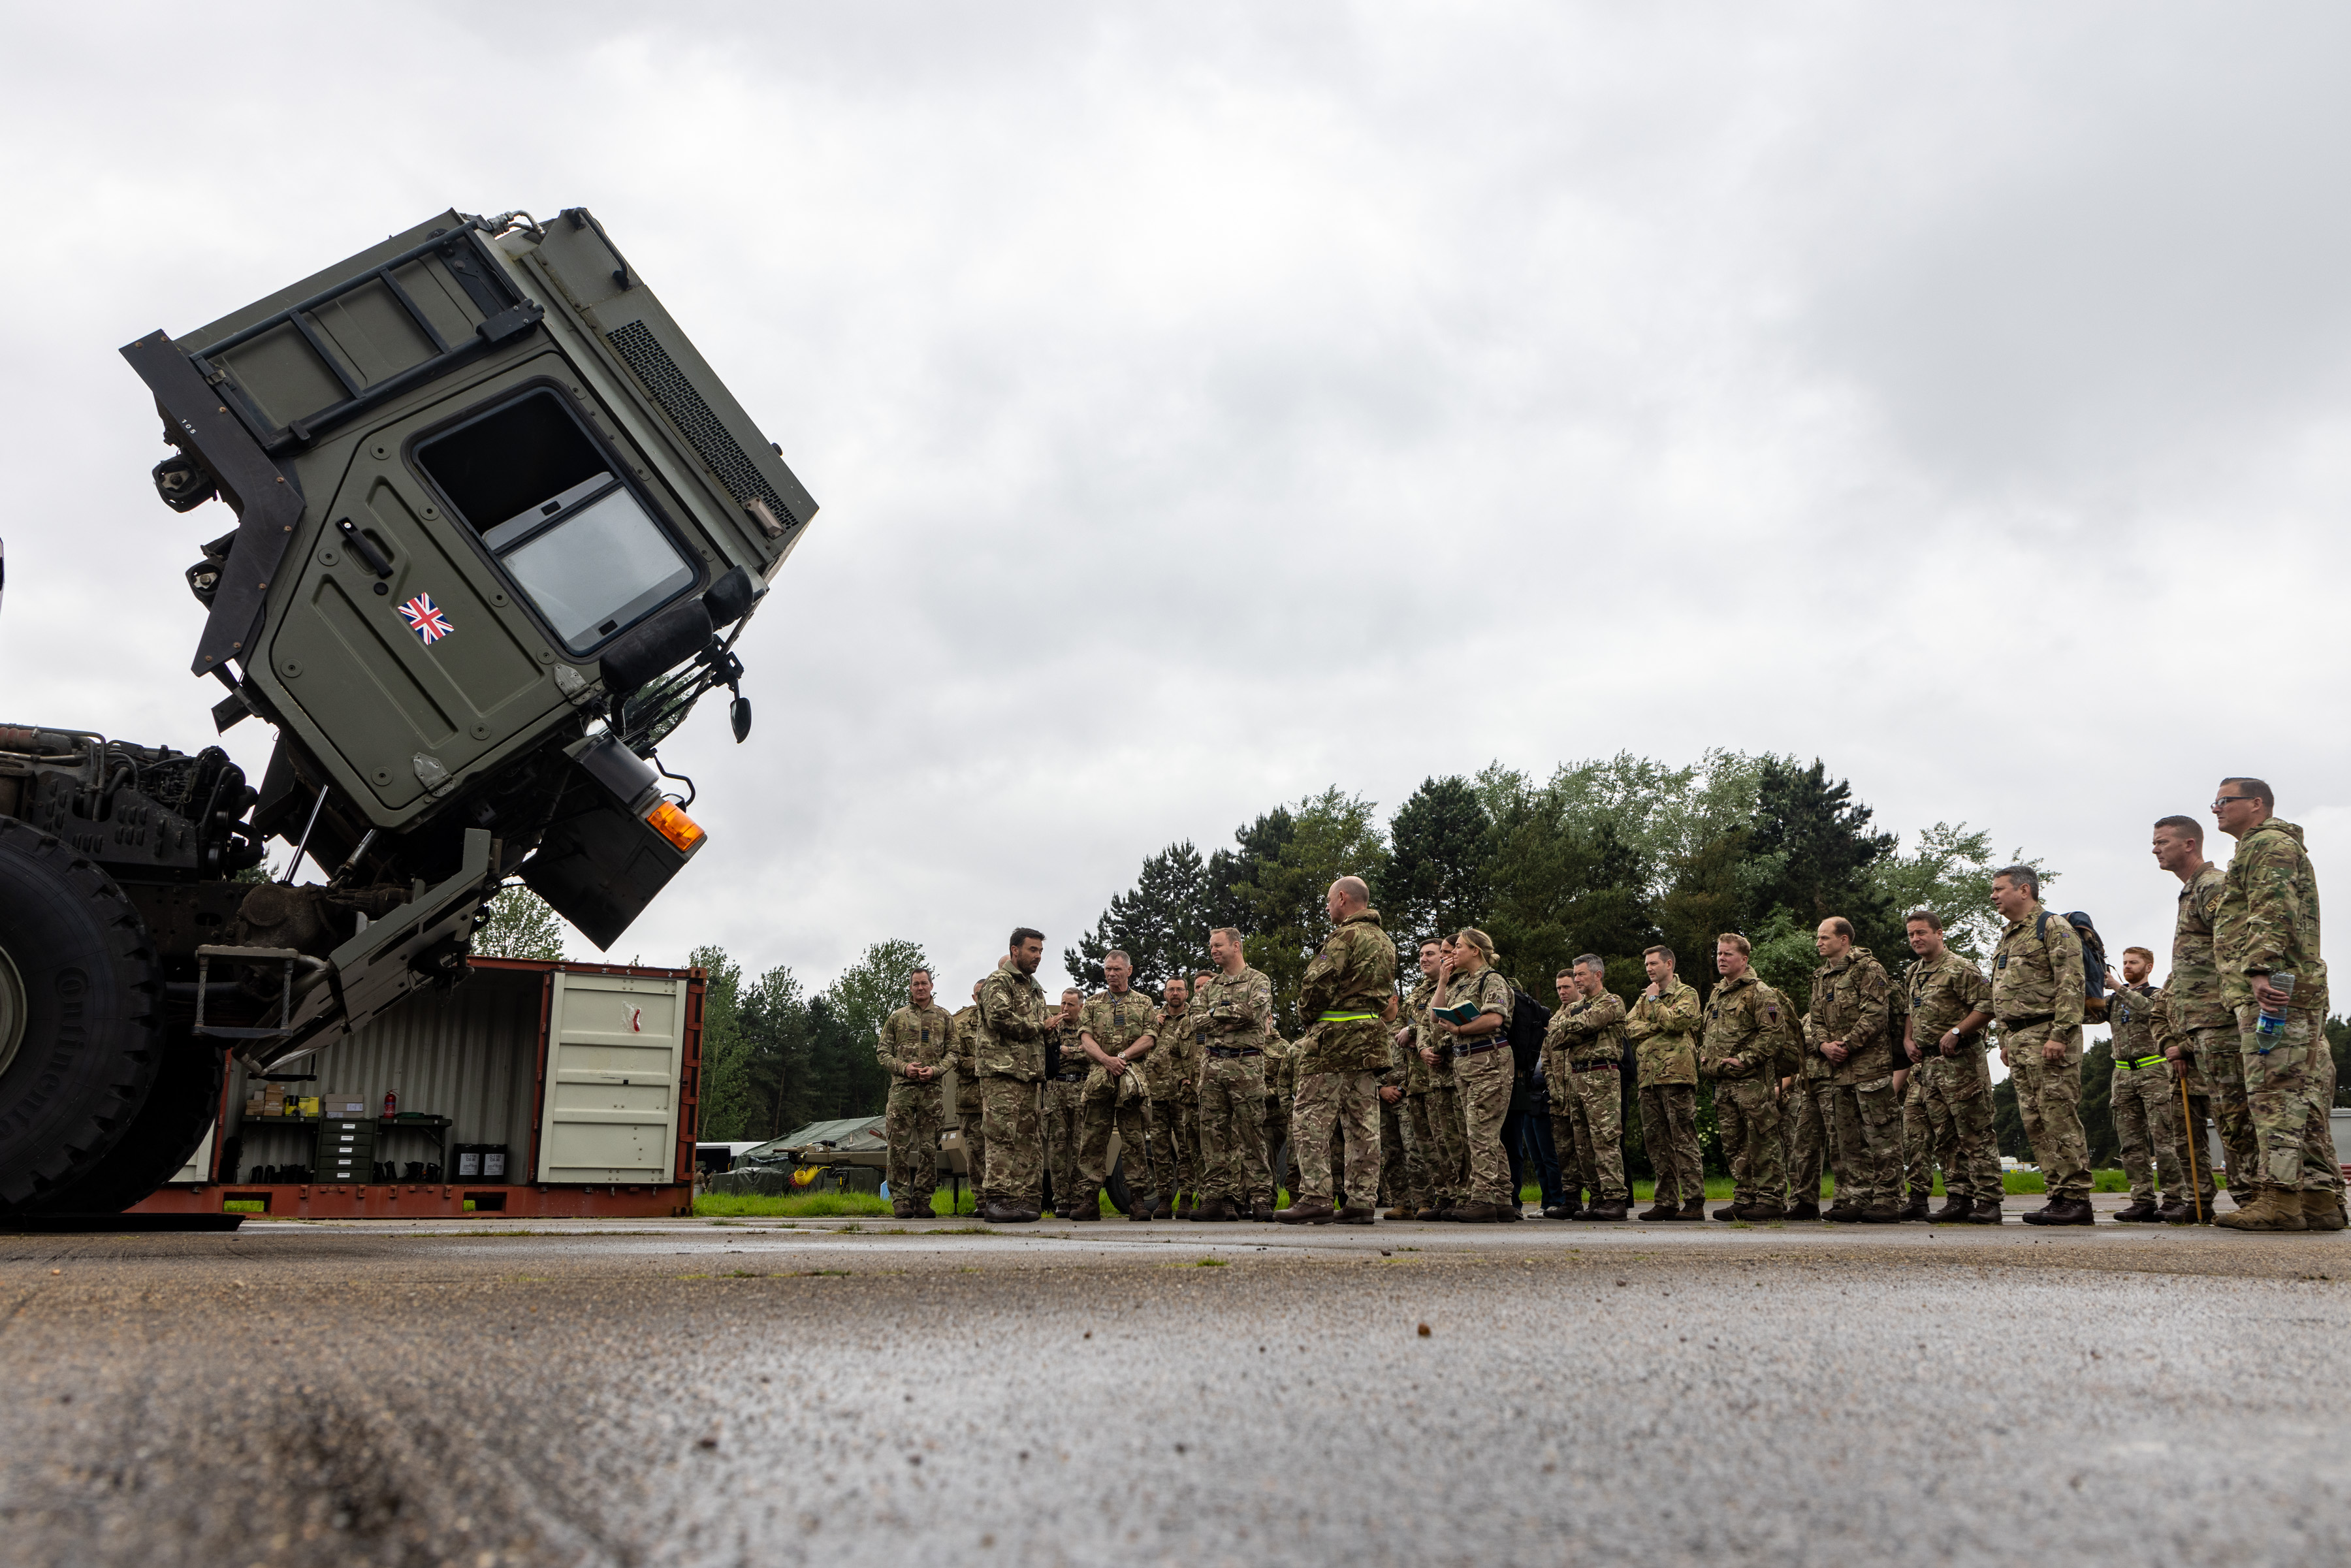 5001 Sqn Demonstrating their capability